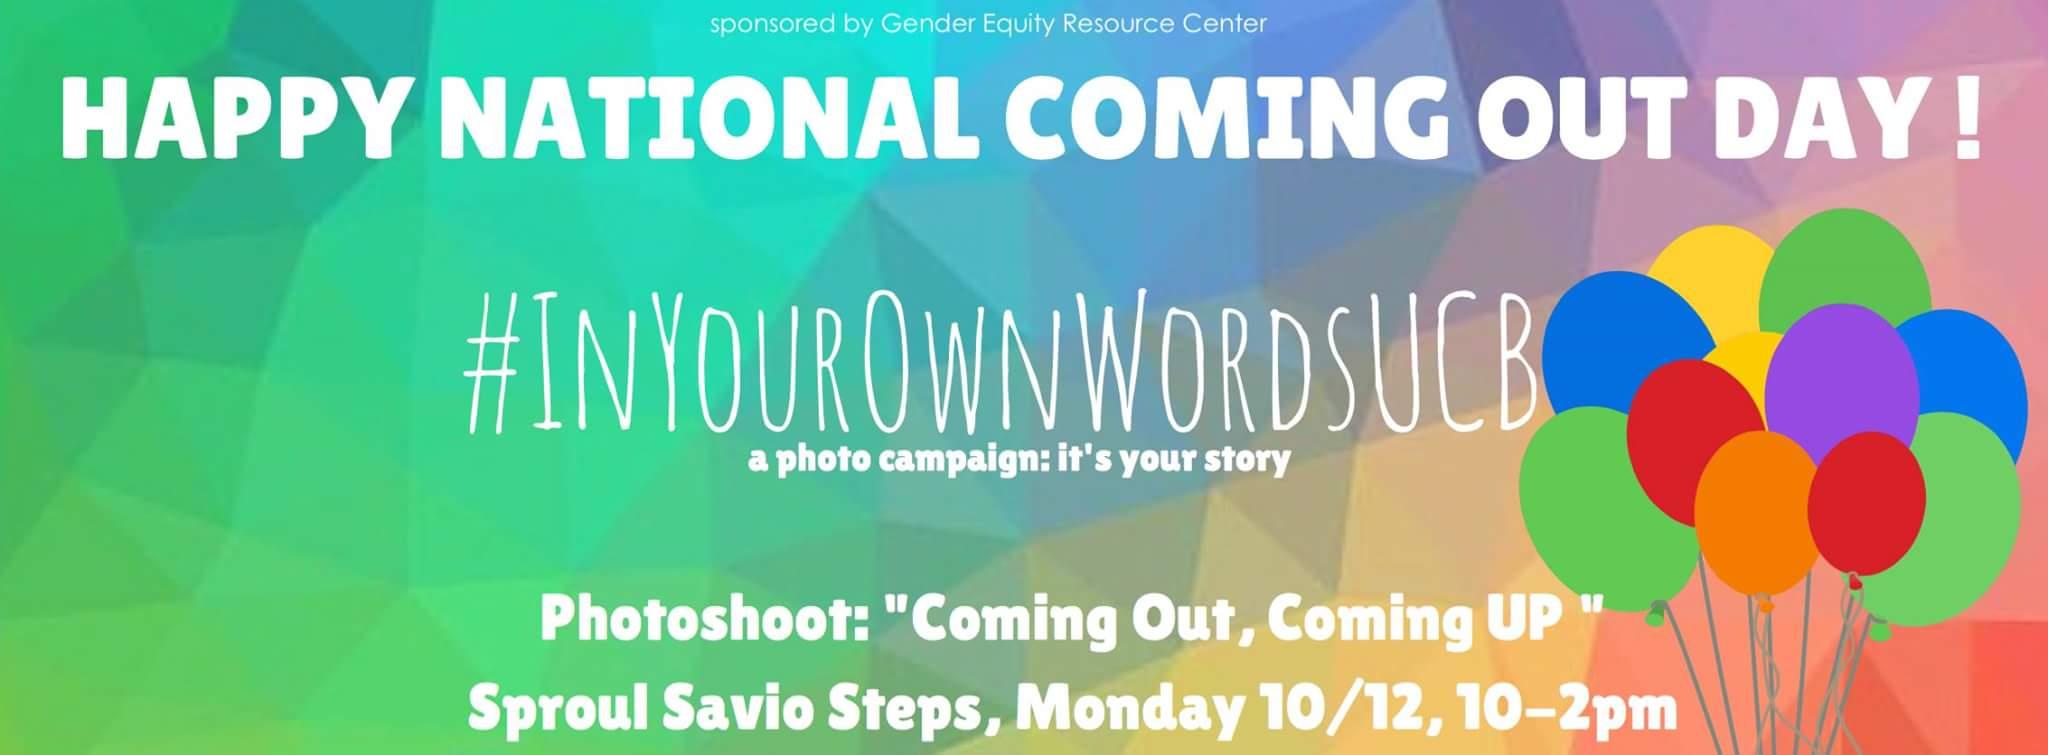 National Coming Out Day 2015 Banner